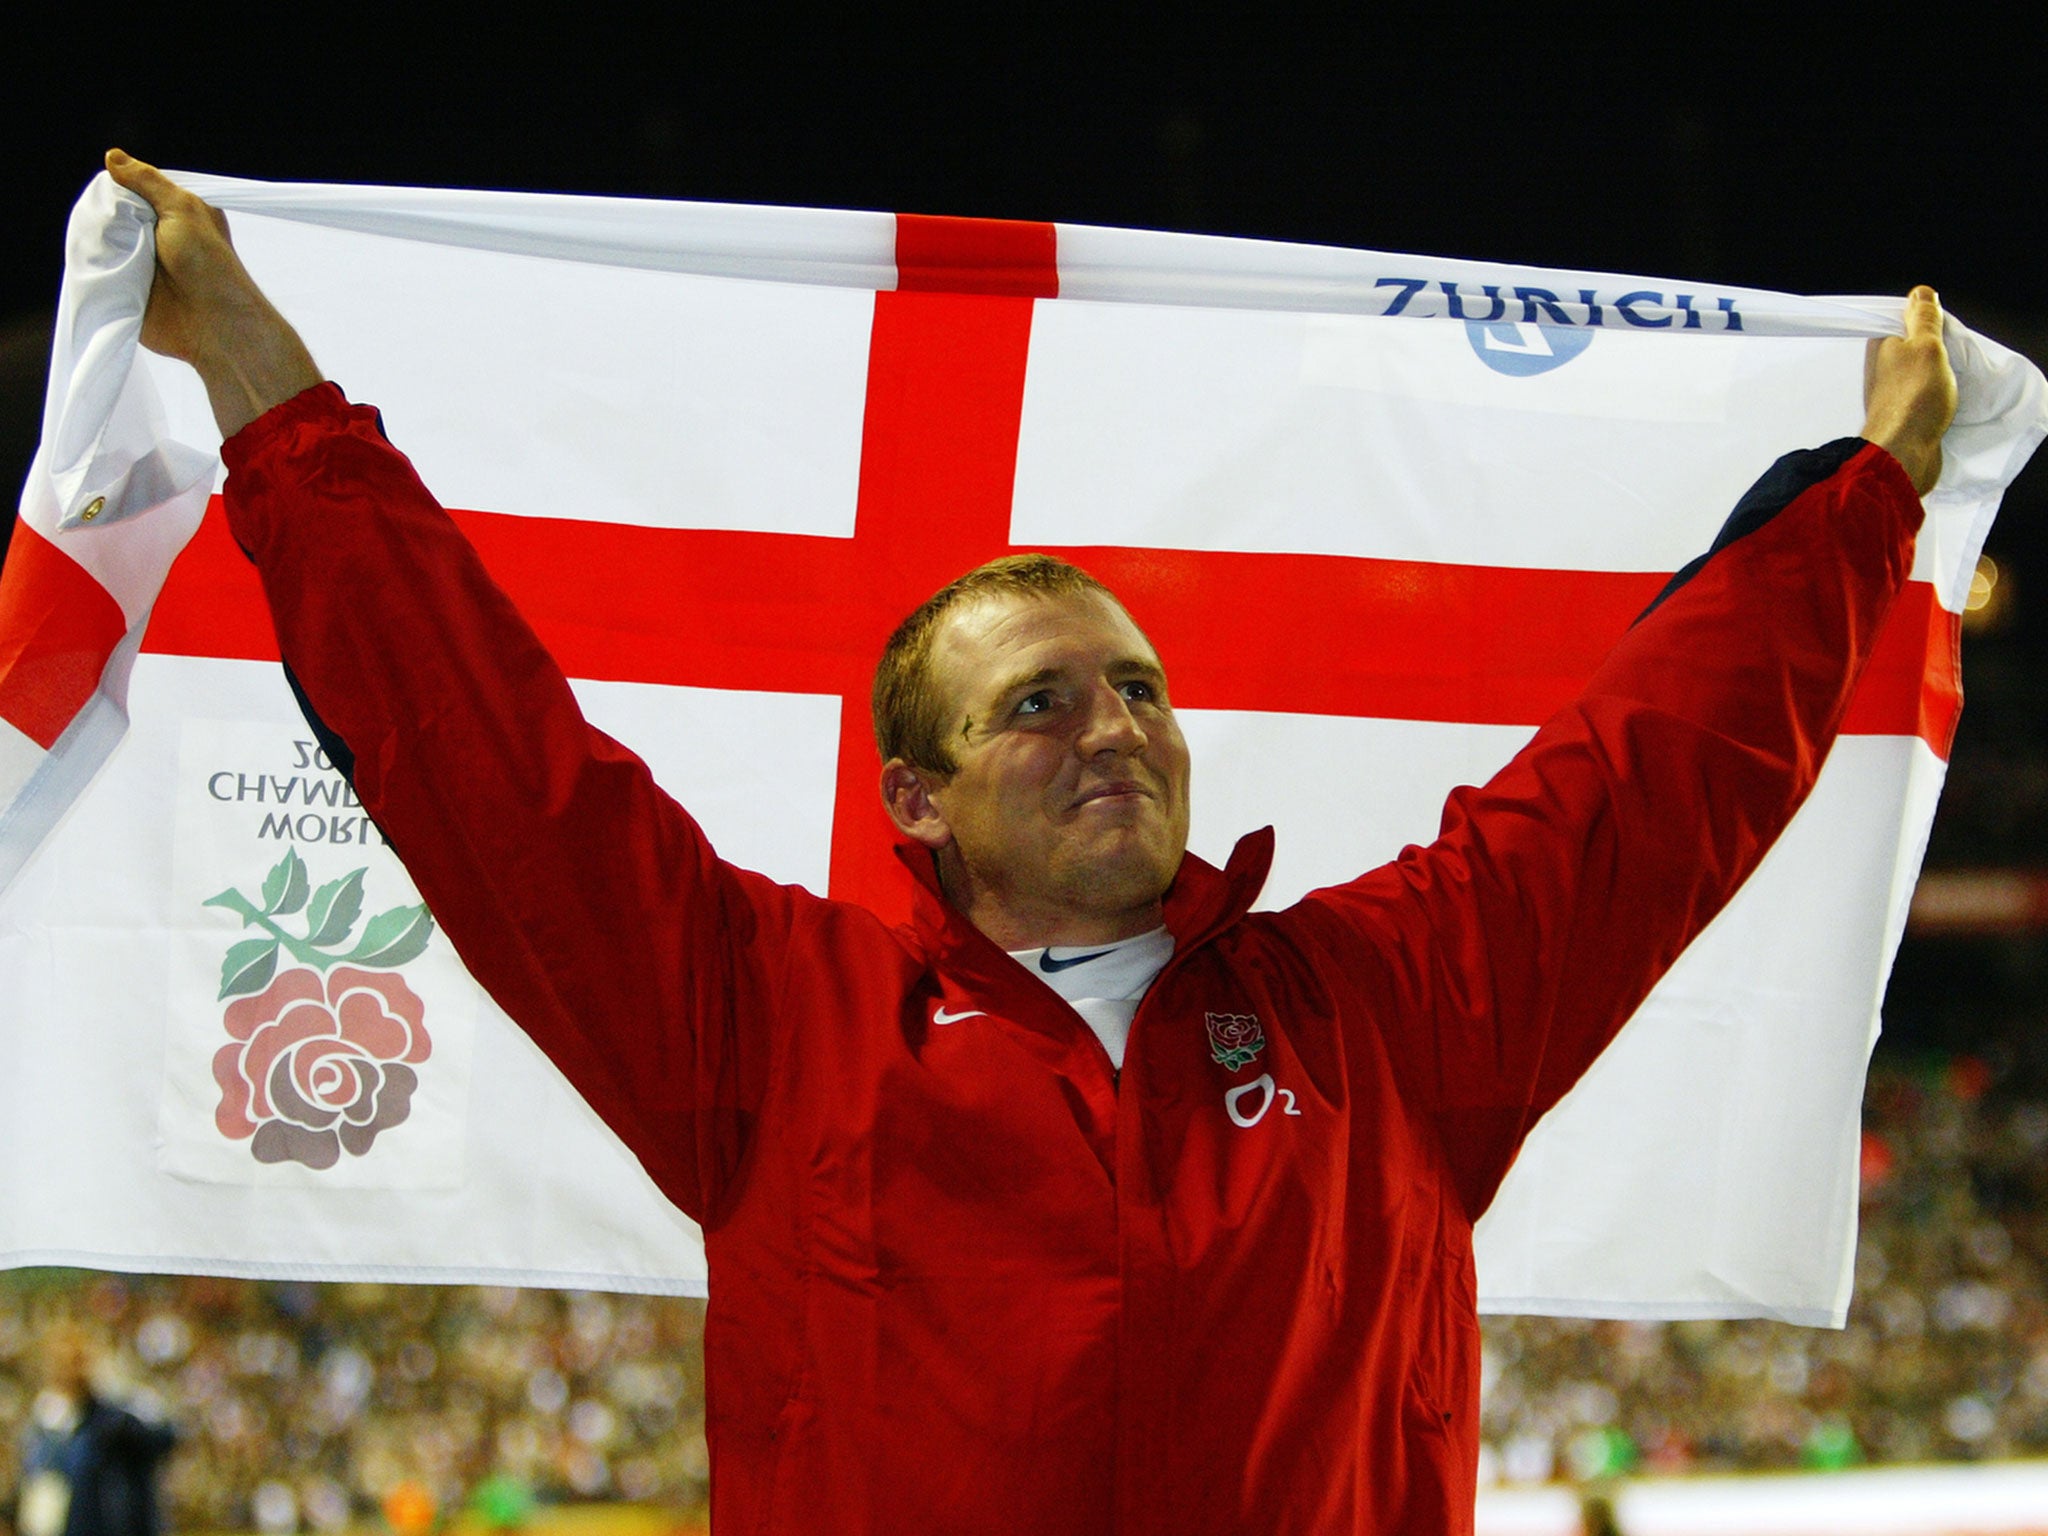 Mike Tindall celebrates following England’s 2003 Rugby World Cup victory over Australia